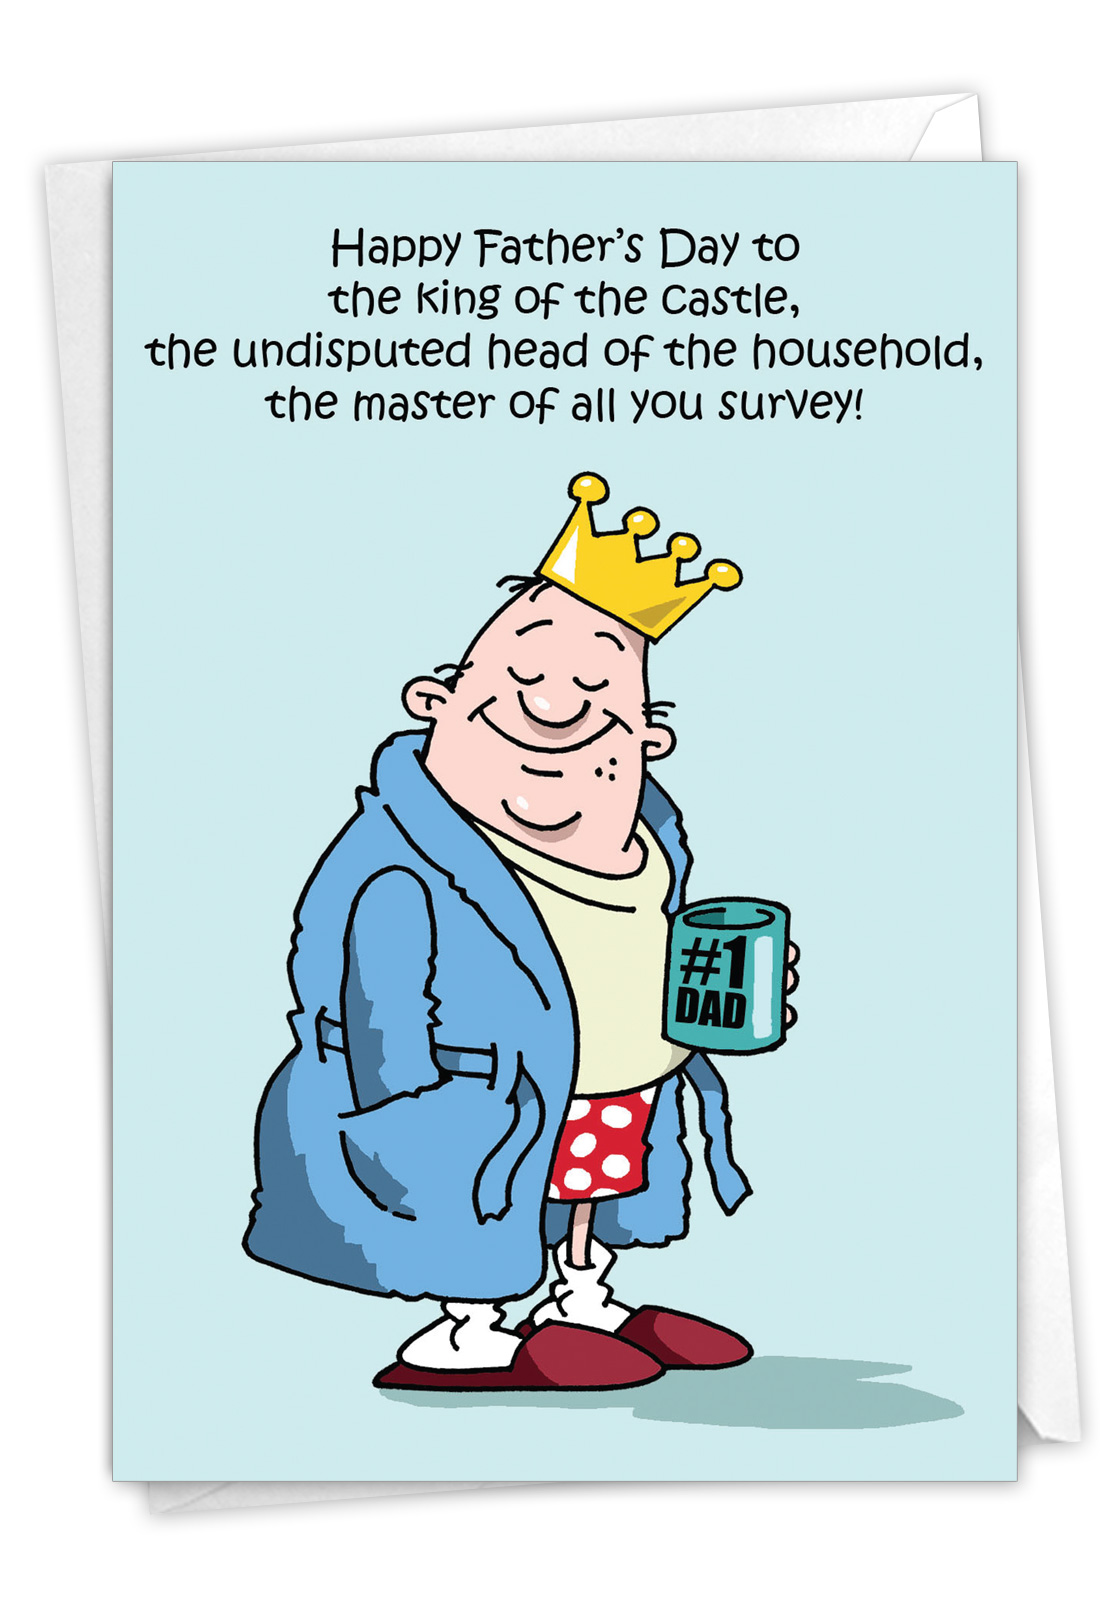 J0239 Jumbo Funny Fathers Day Card: King of the Castle With Matching Envelope | eBay